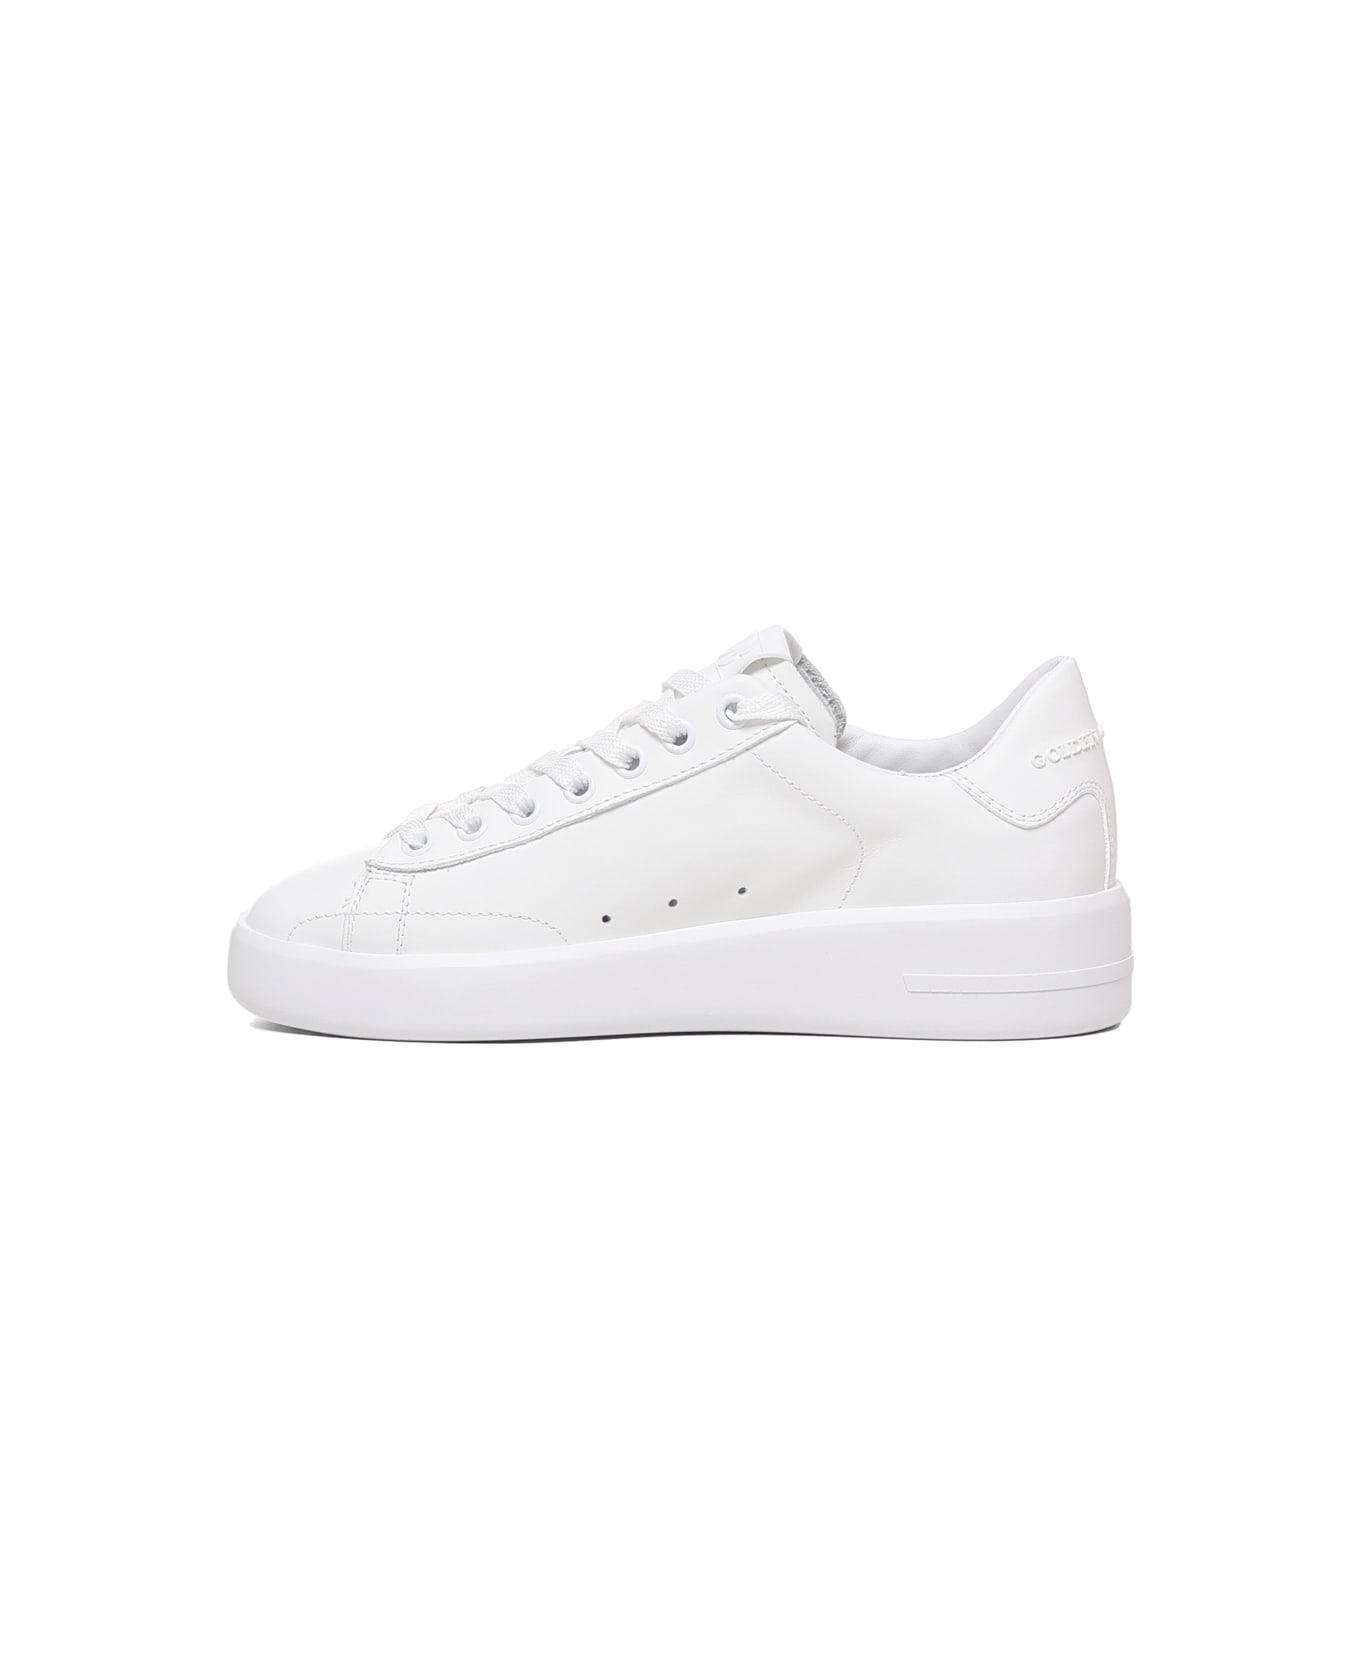 Golden Goose Pure New Sneakers In Leather With Contrasting Heel Tab - White